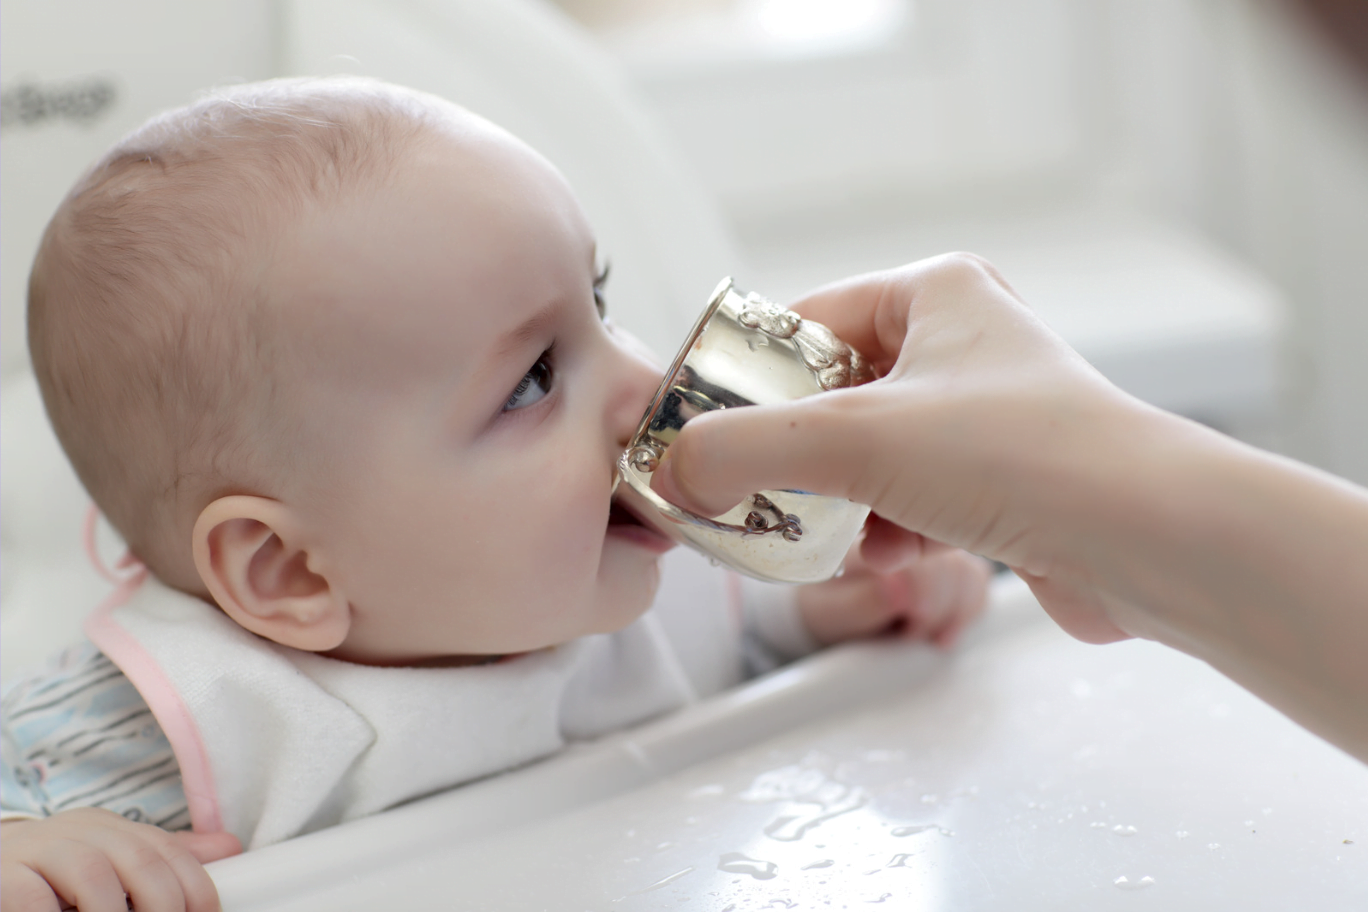 Baby drinking cooled boiled water for constipation in free flow cup